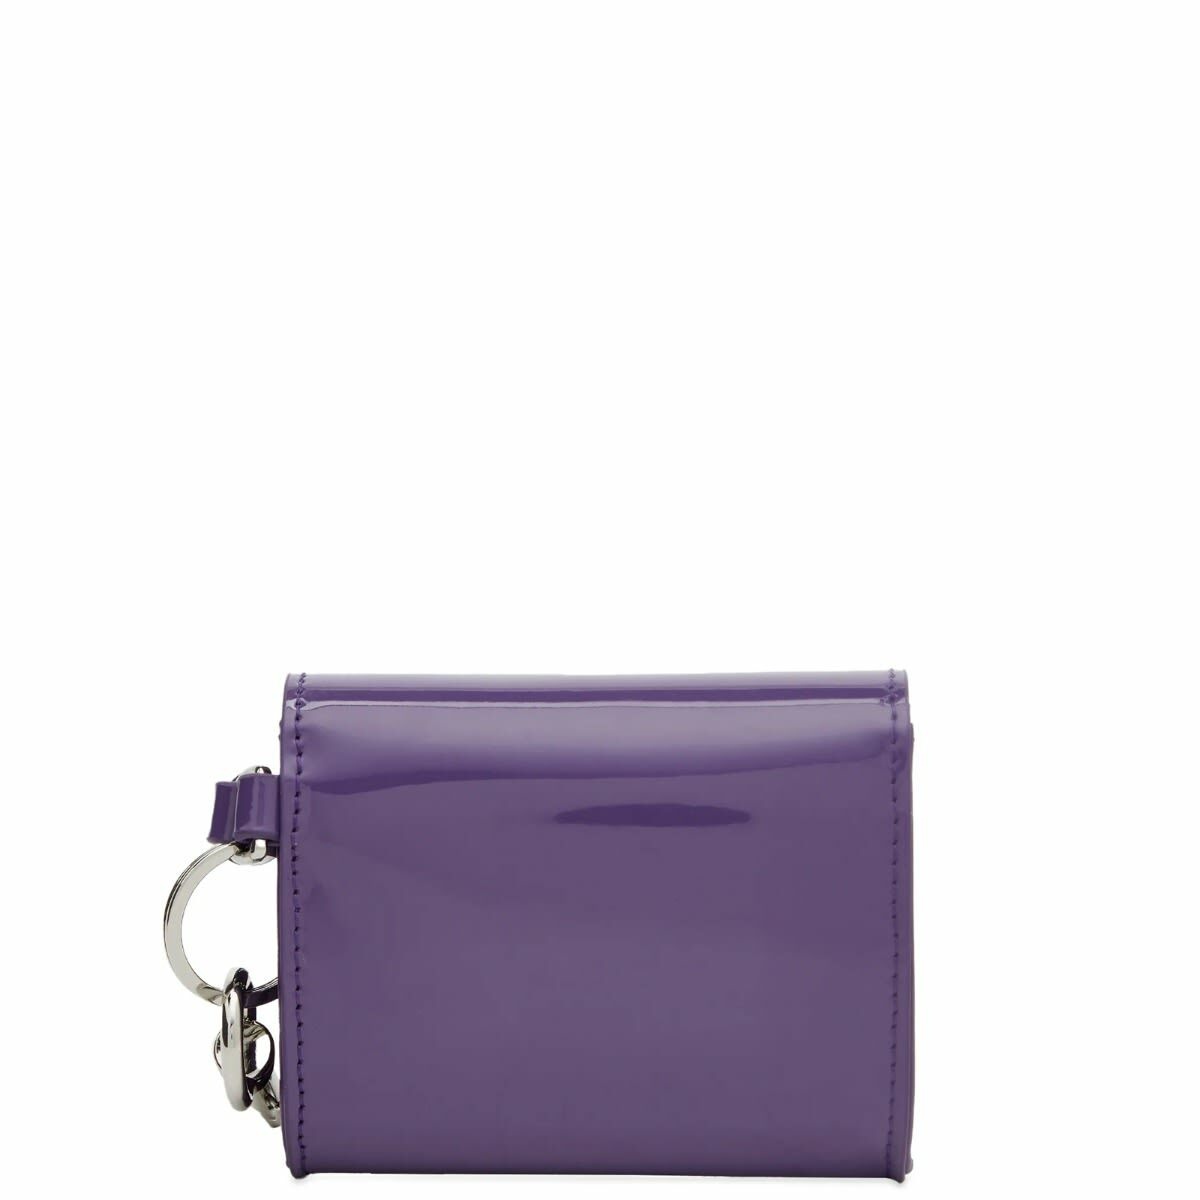 Modern Artificial Leather Ladies Purple Hand Bag, Size: W12 X L5 X H8 Inch  (bag) at Rs 379 in Hyderabad